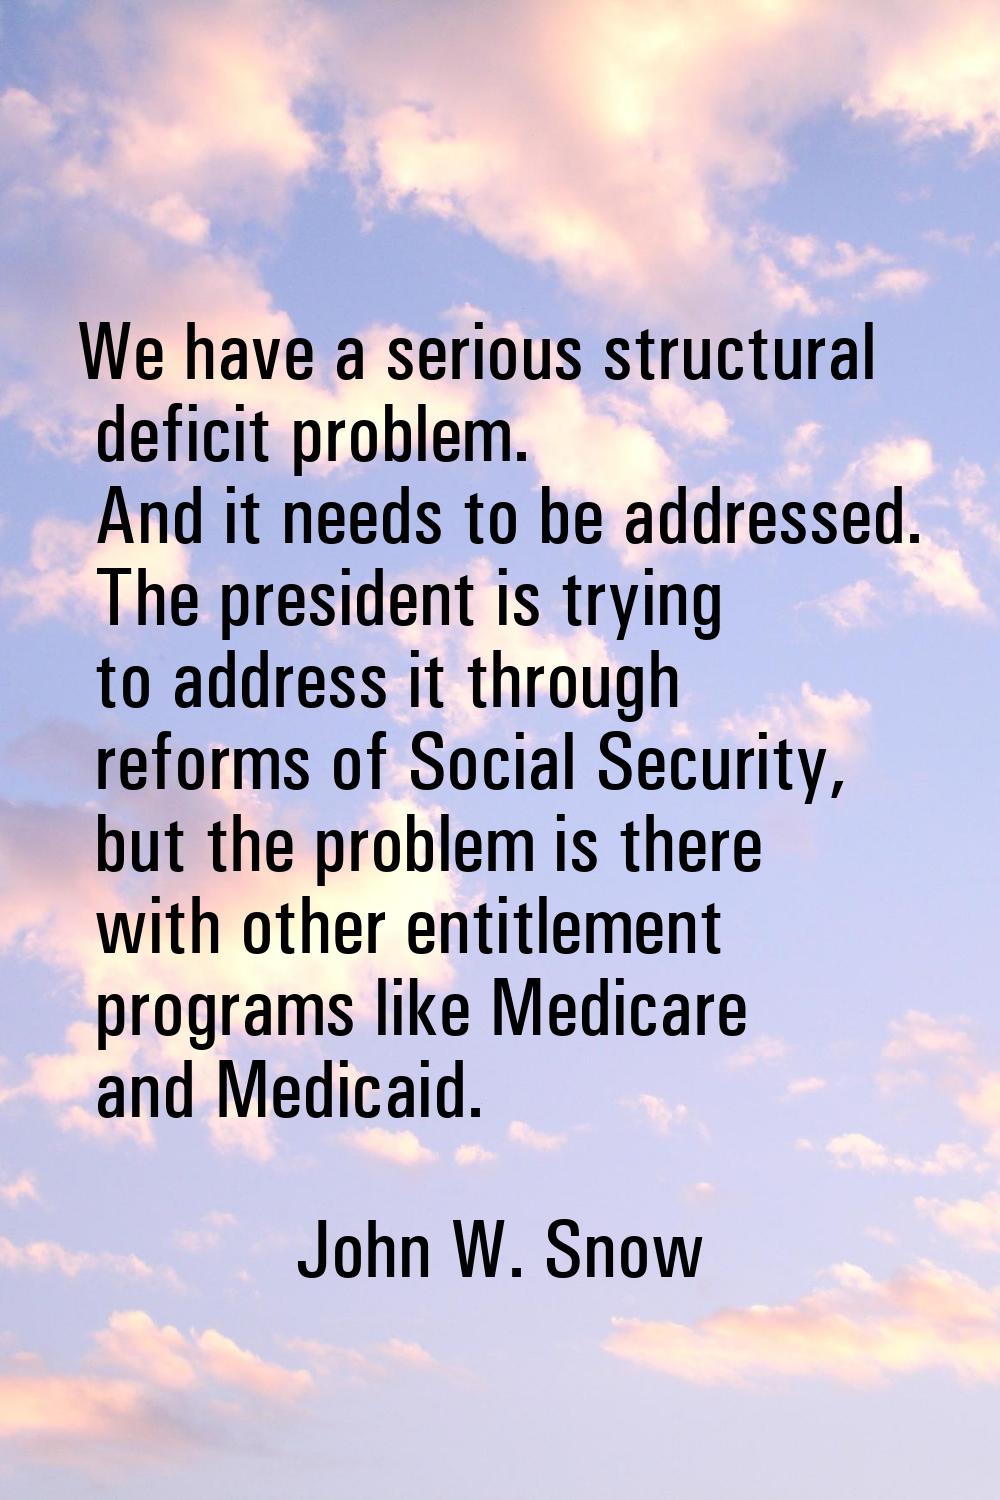 We have a serious structural deficit problem. And it needs to be addressed. The president is trying